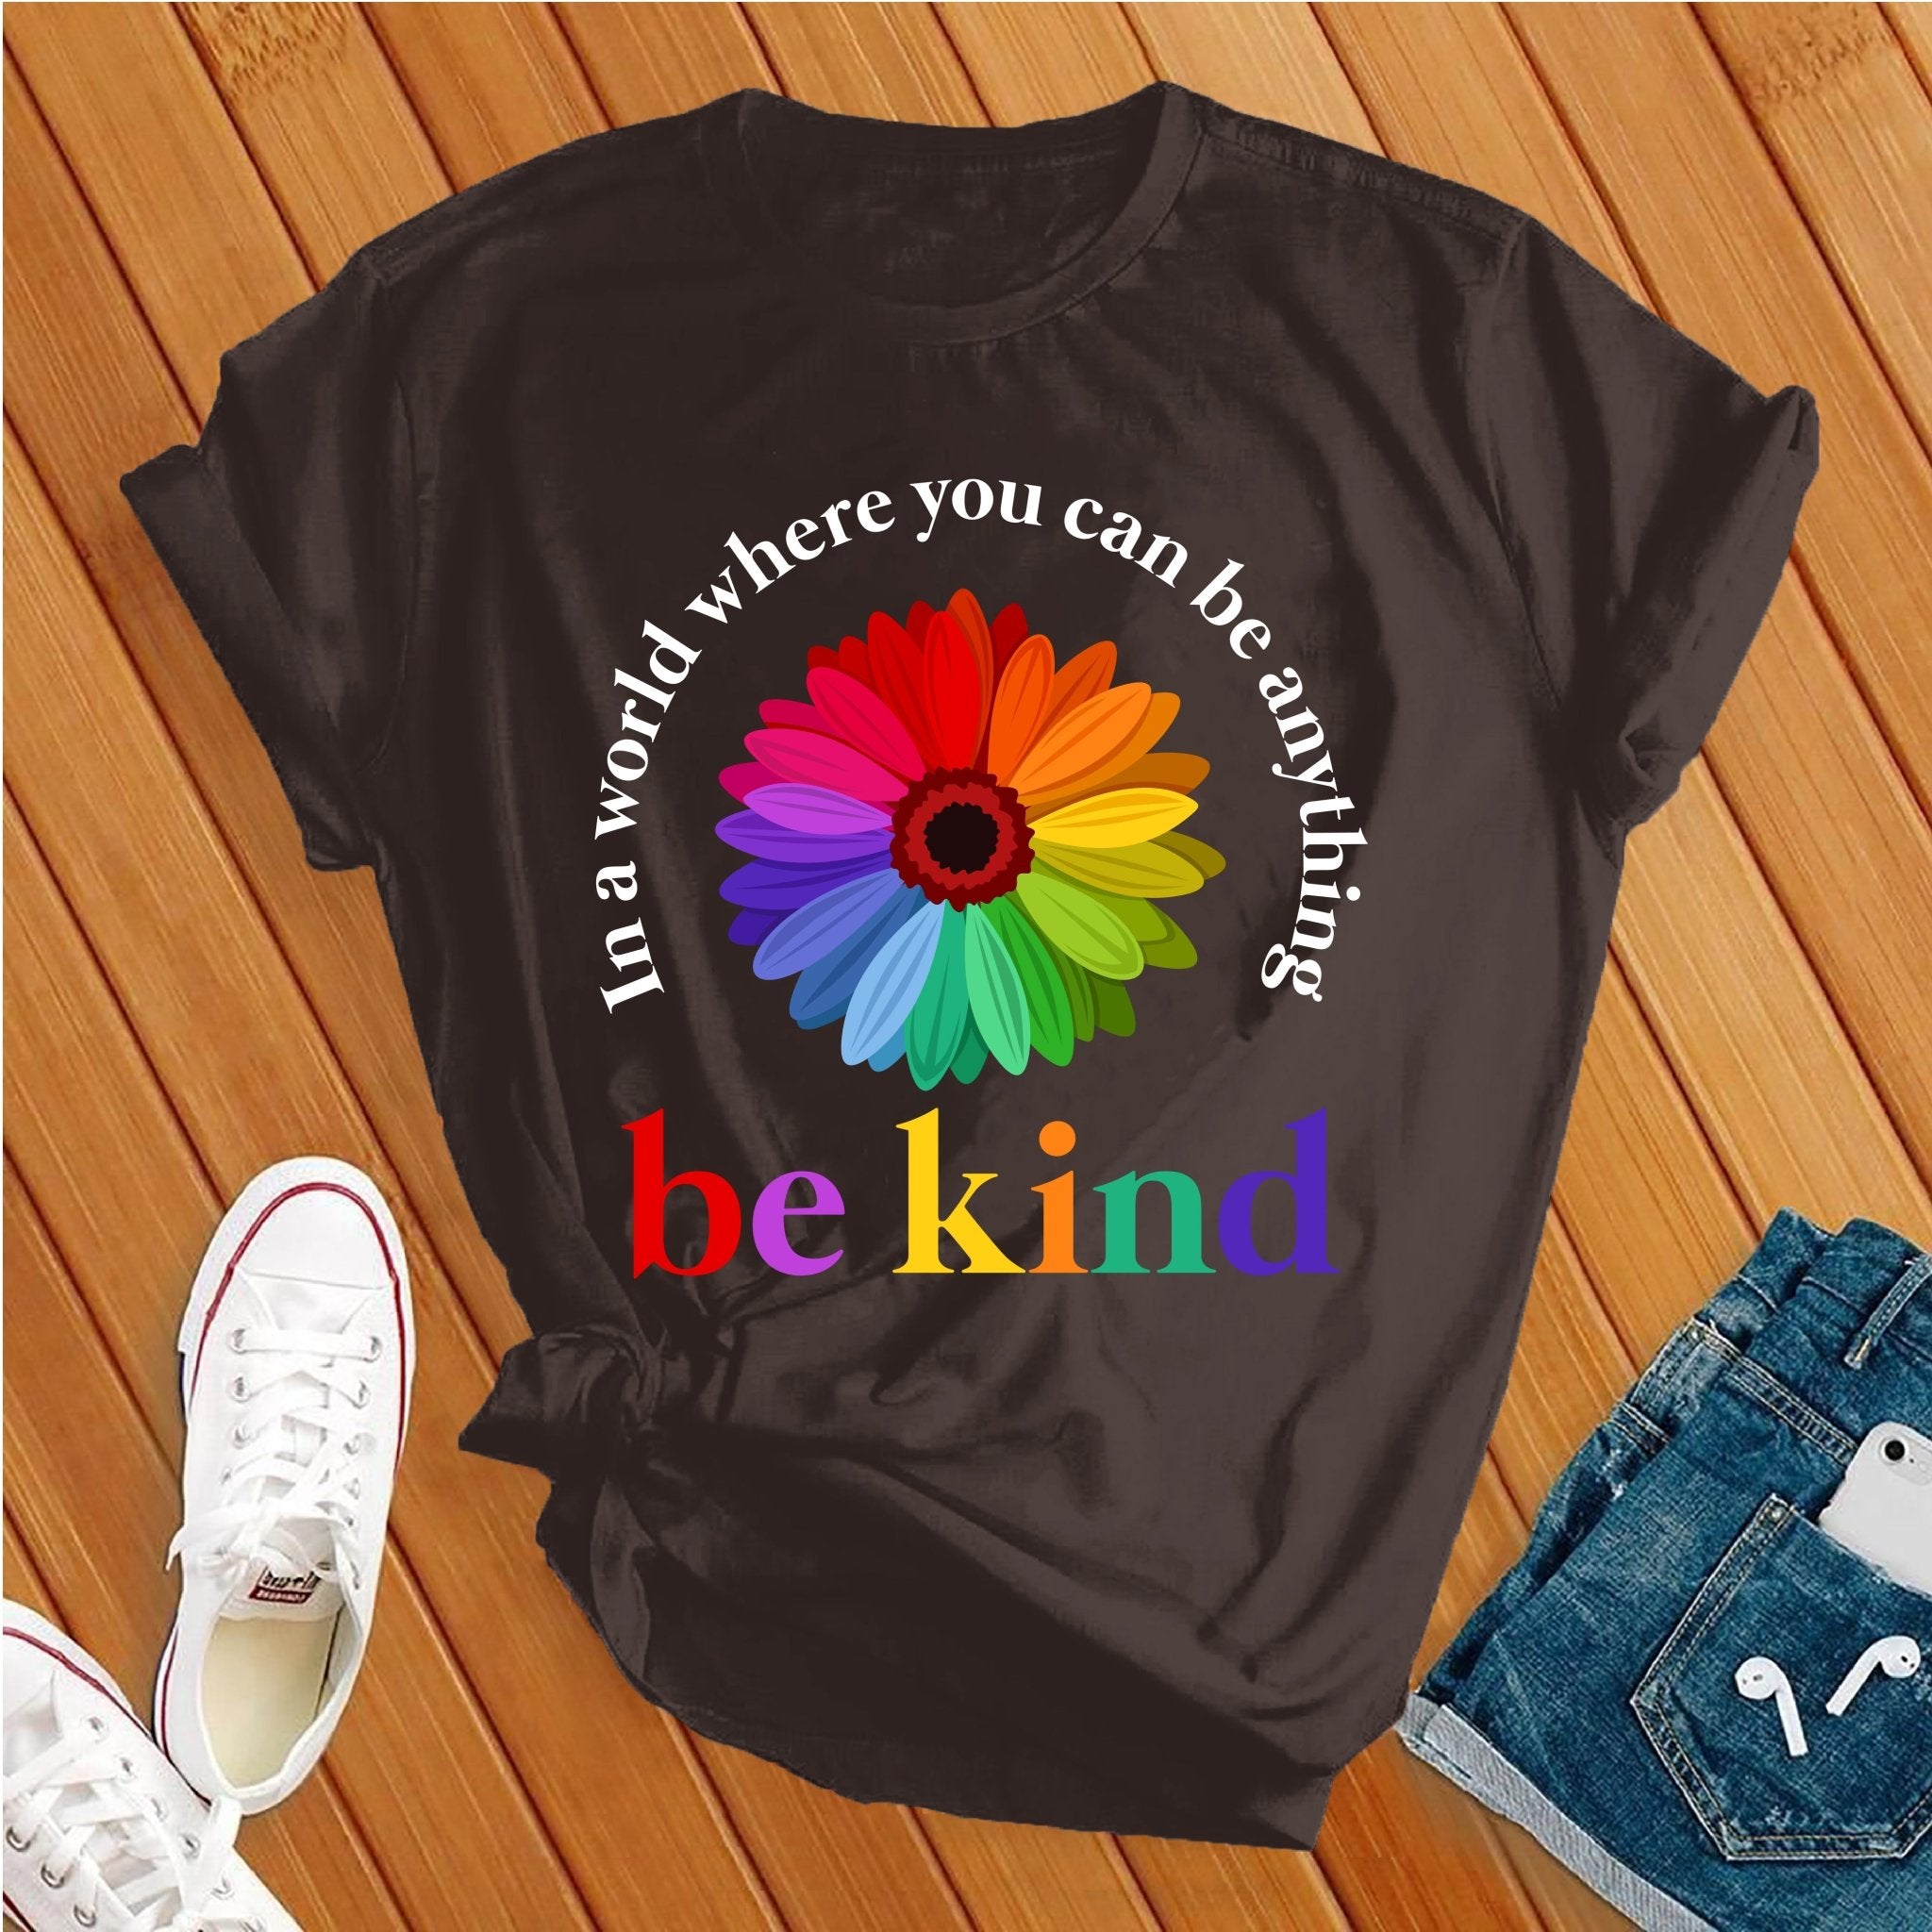 In a World Where You Can Be Anything Tee - Love Tees